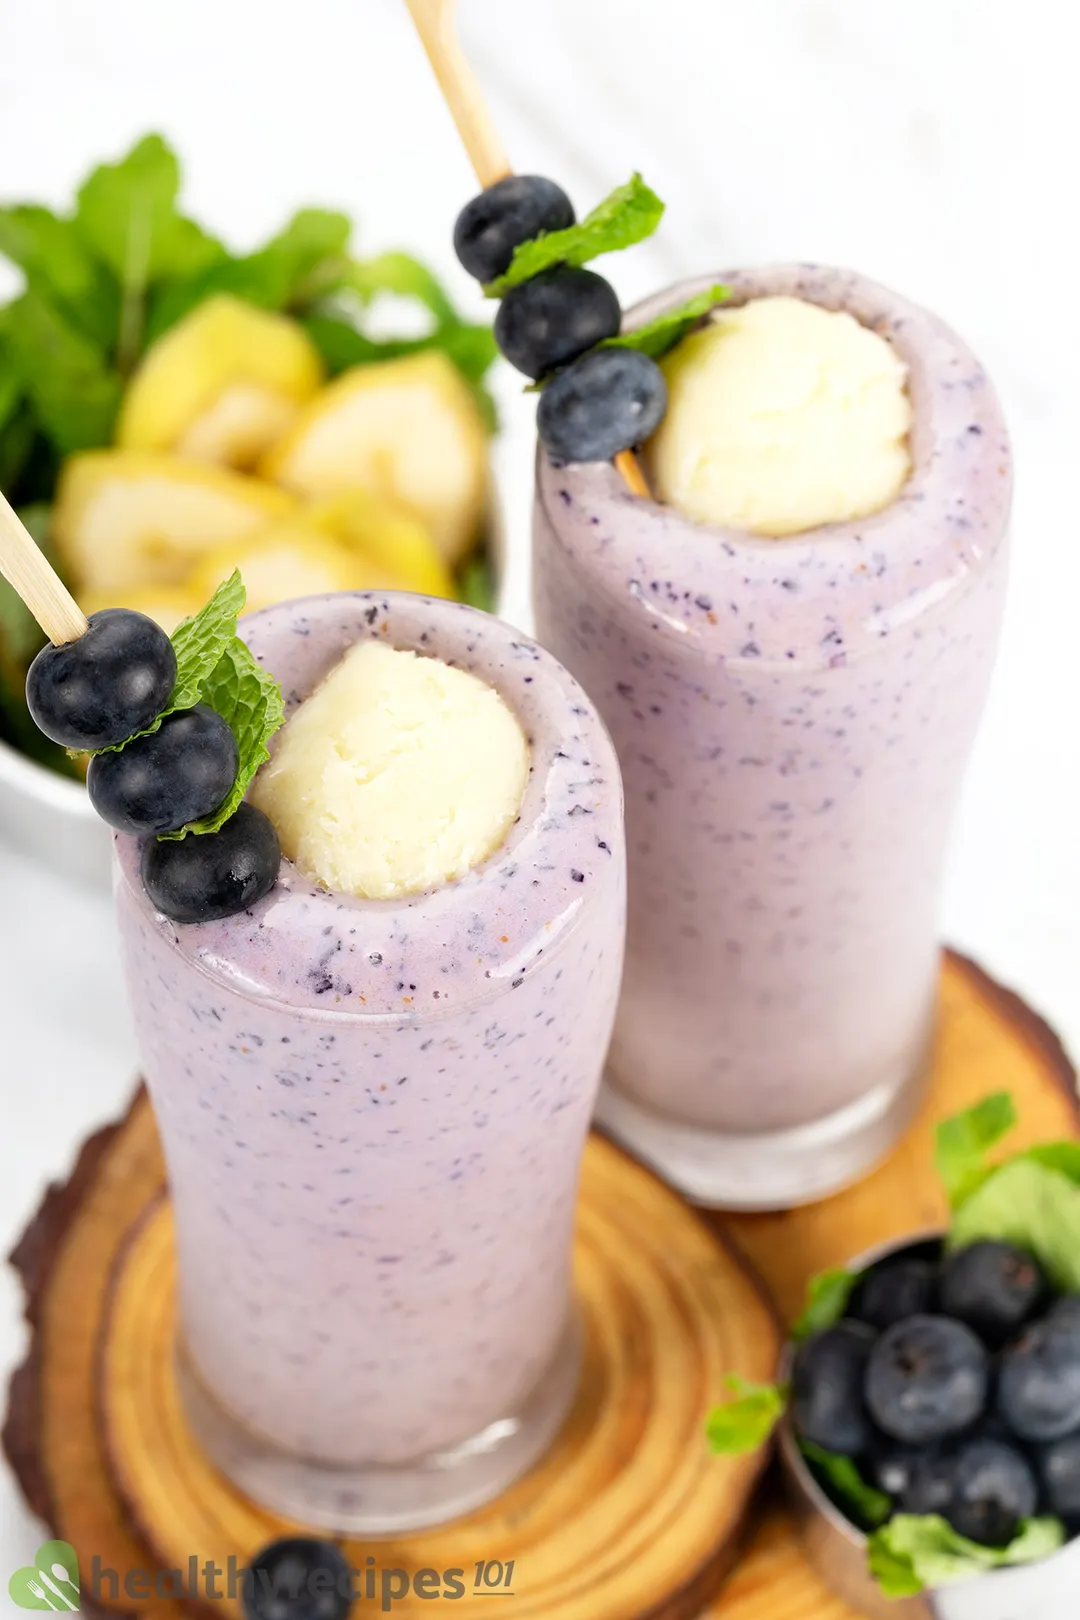 Two tall glasses of blueberry banana smoothie placed on wooden boards and surrounded by blueberries, sliced bananas, and mint leaves.